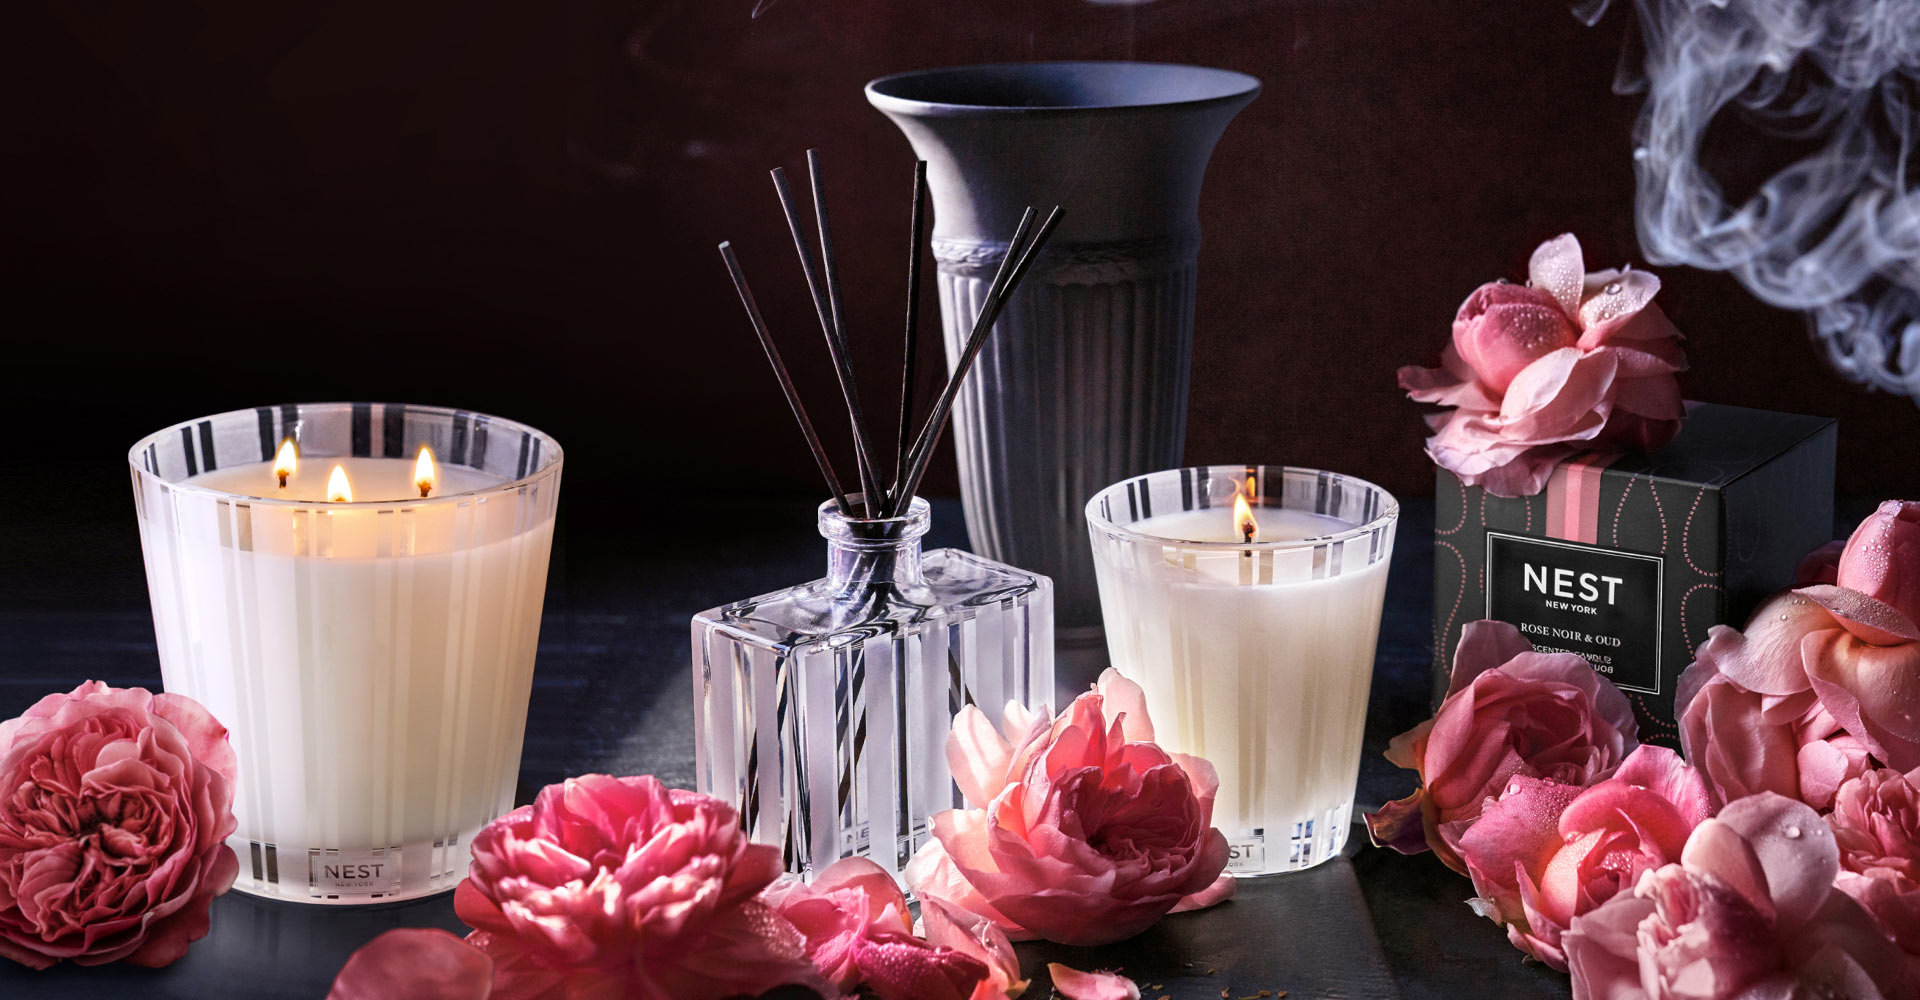 Best Rose & Oud Perfumes  Rose And Oud Fragrances 